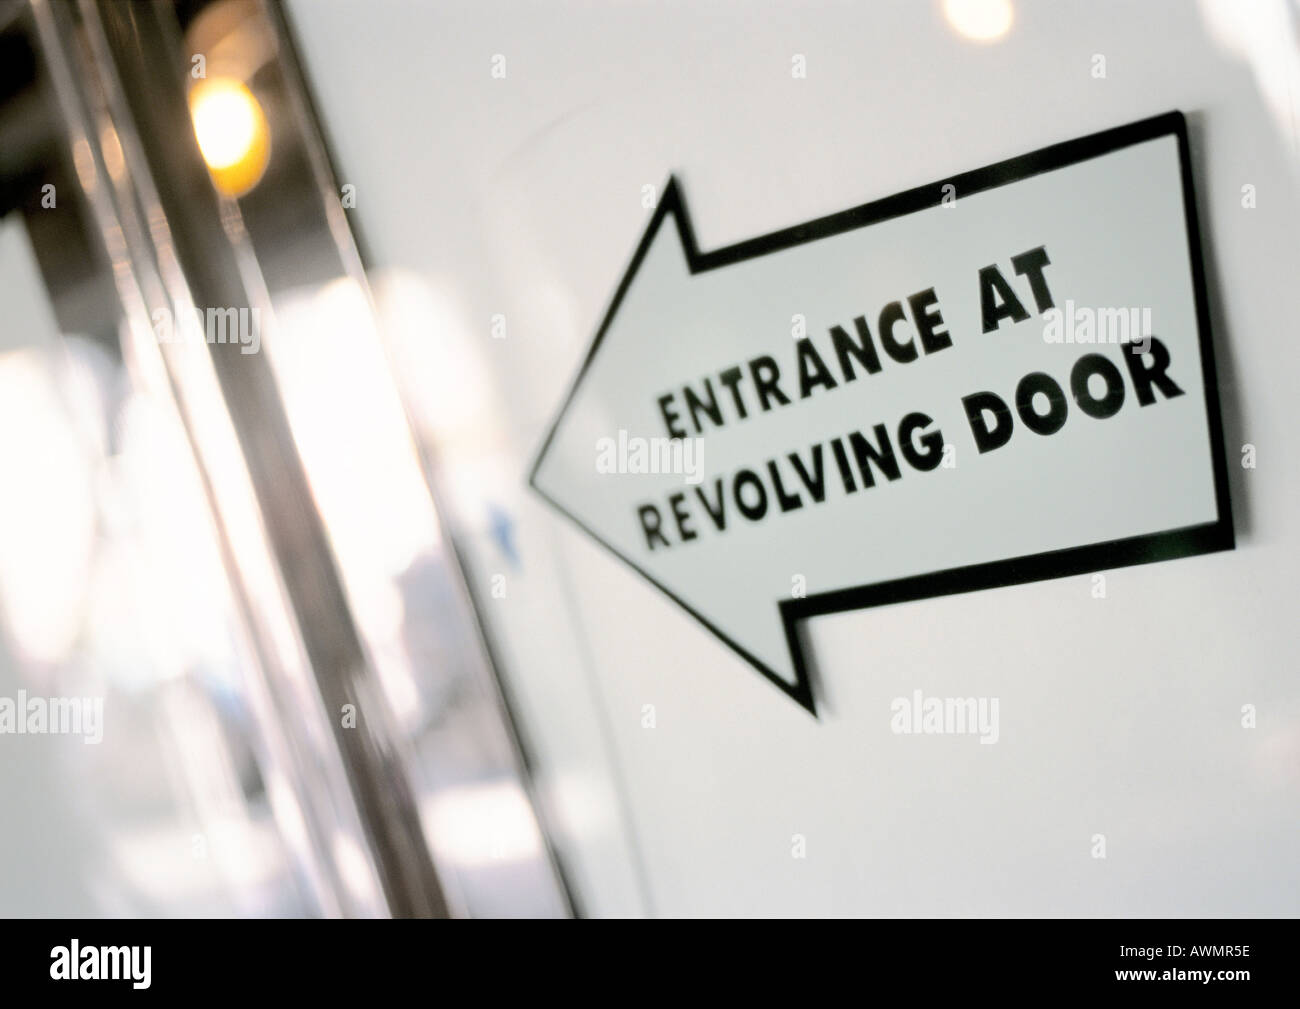 Entrance at revolving door text on arrow sign, close-up Stock Photo